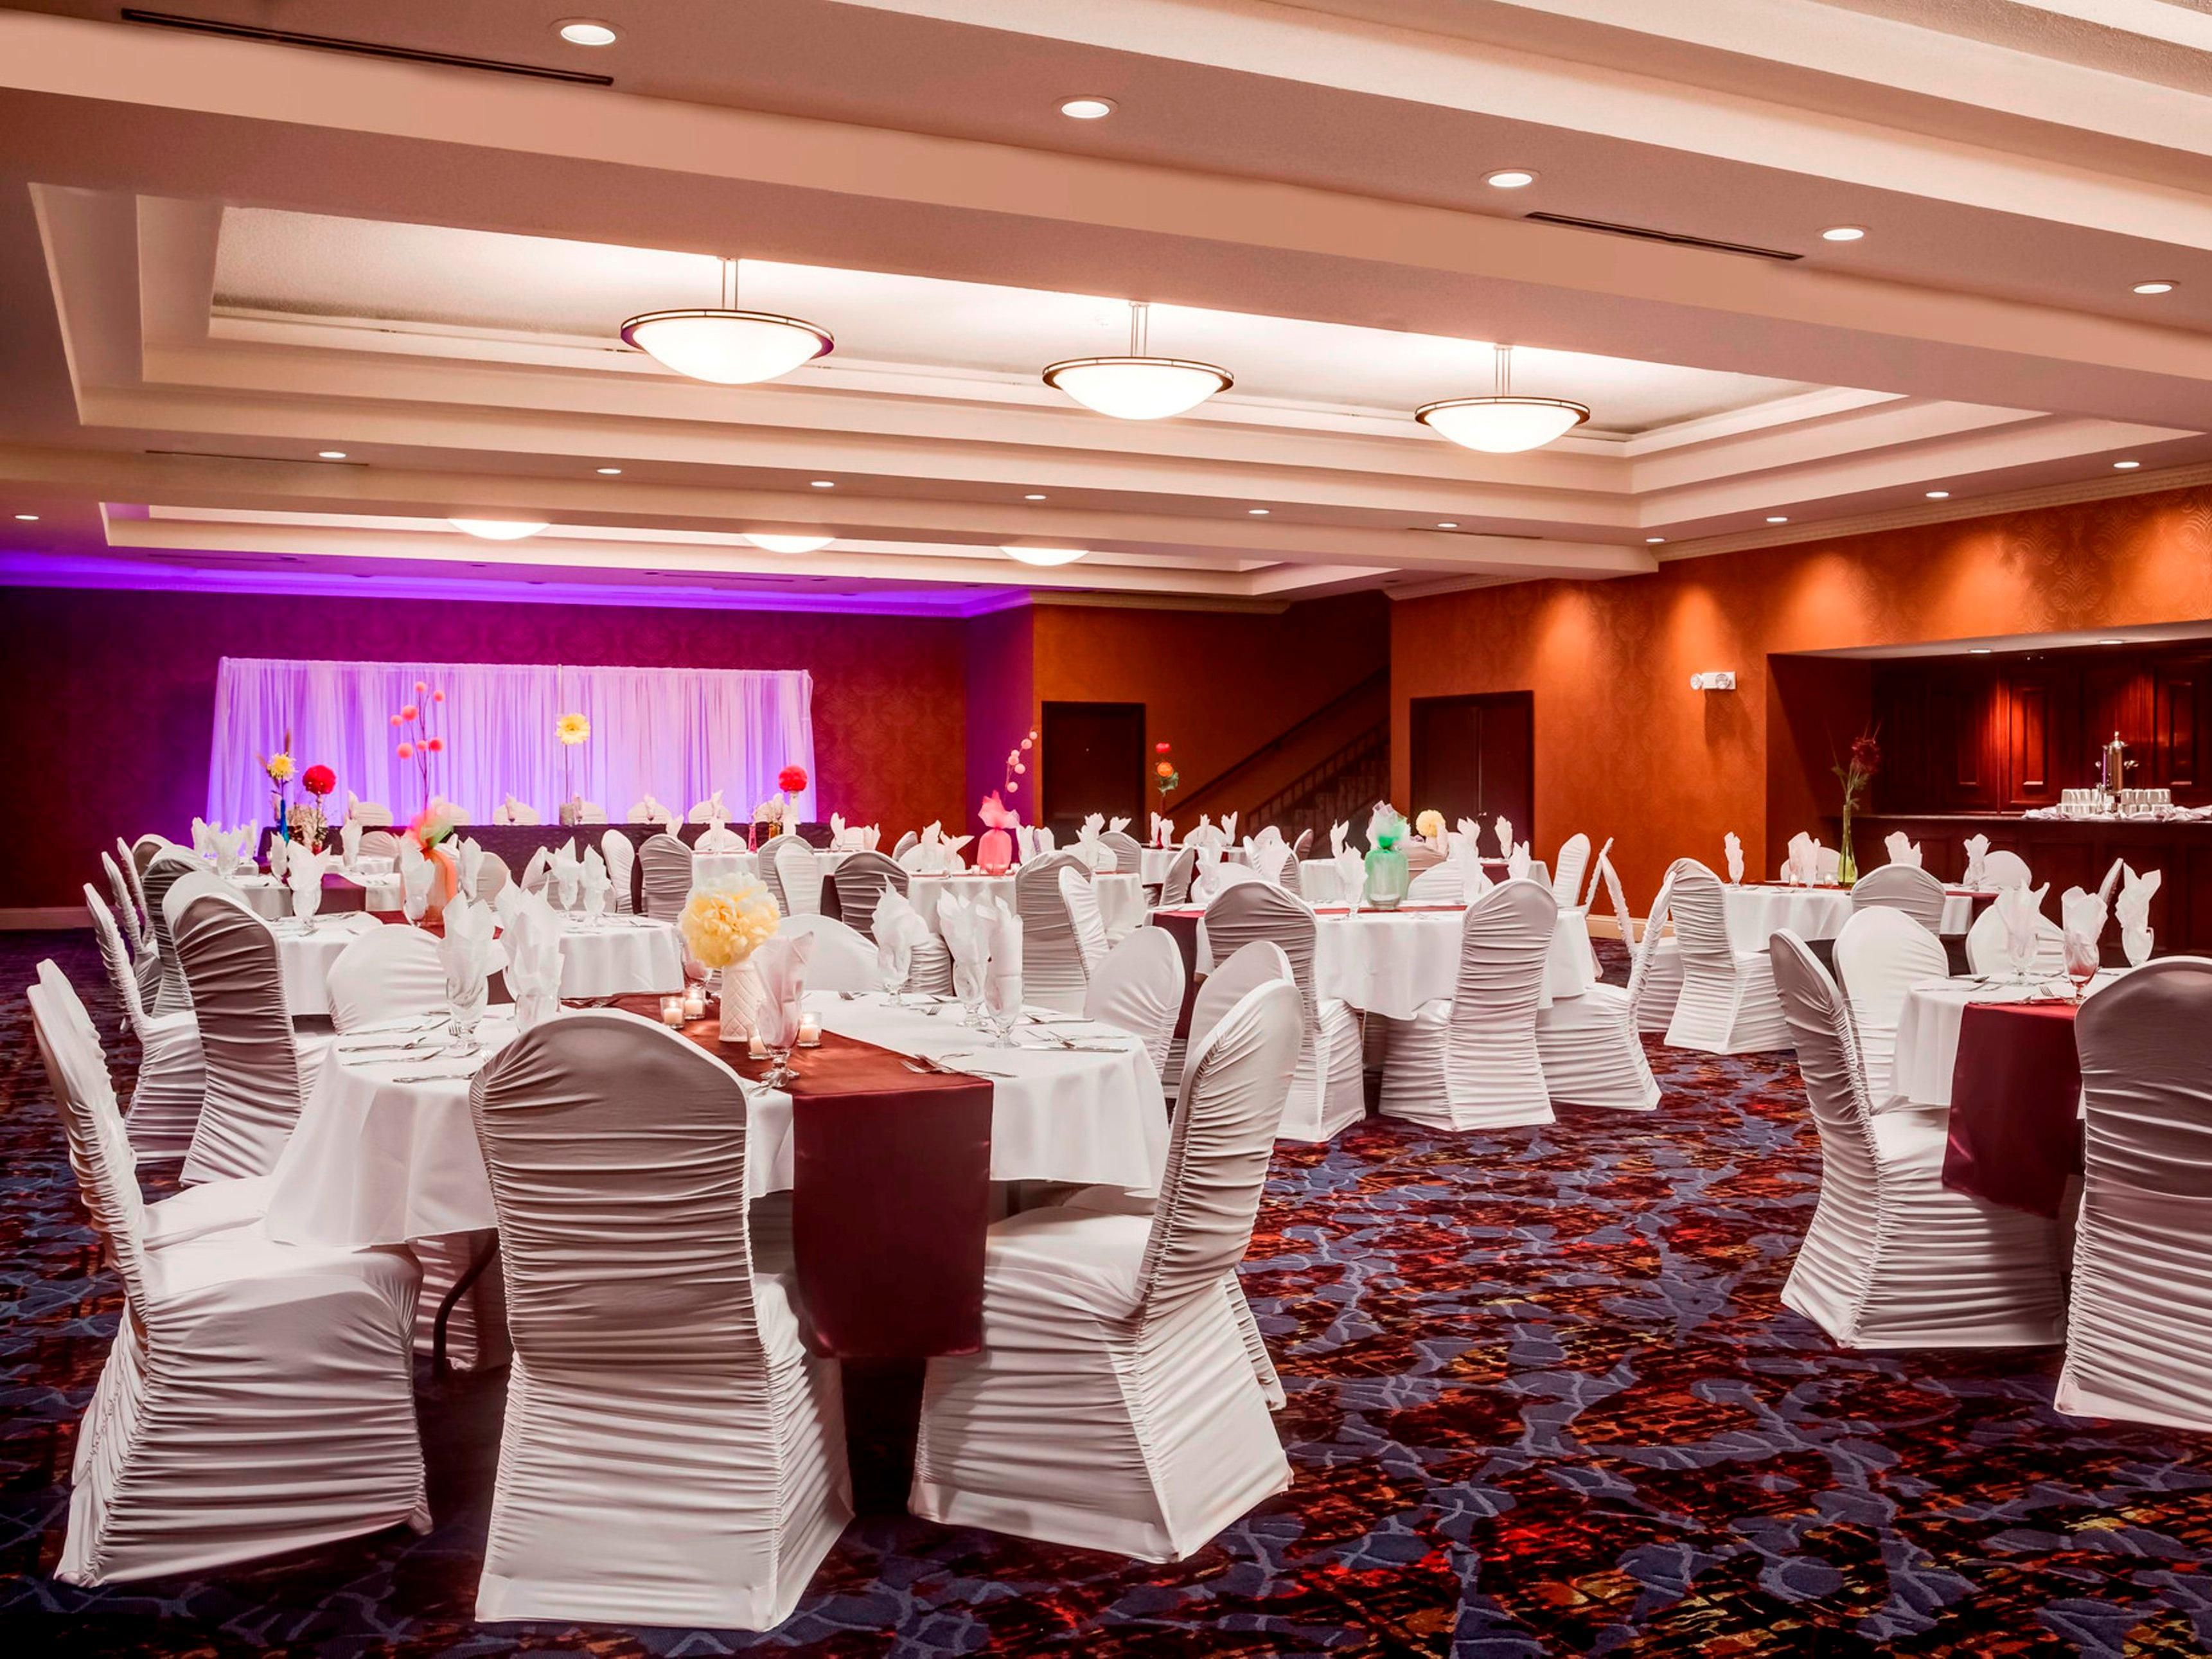 Let our Catering and Events team help you plan the wedding and reception of your dreams. With over 9,000 square feet of event space inside our hotel, we can customize something just for you. Download our wedding pricing pamphlet today.